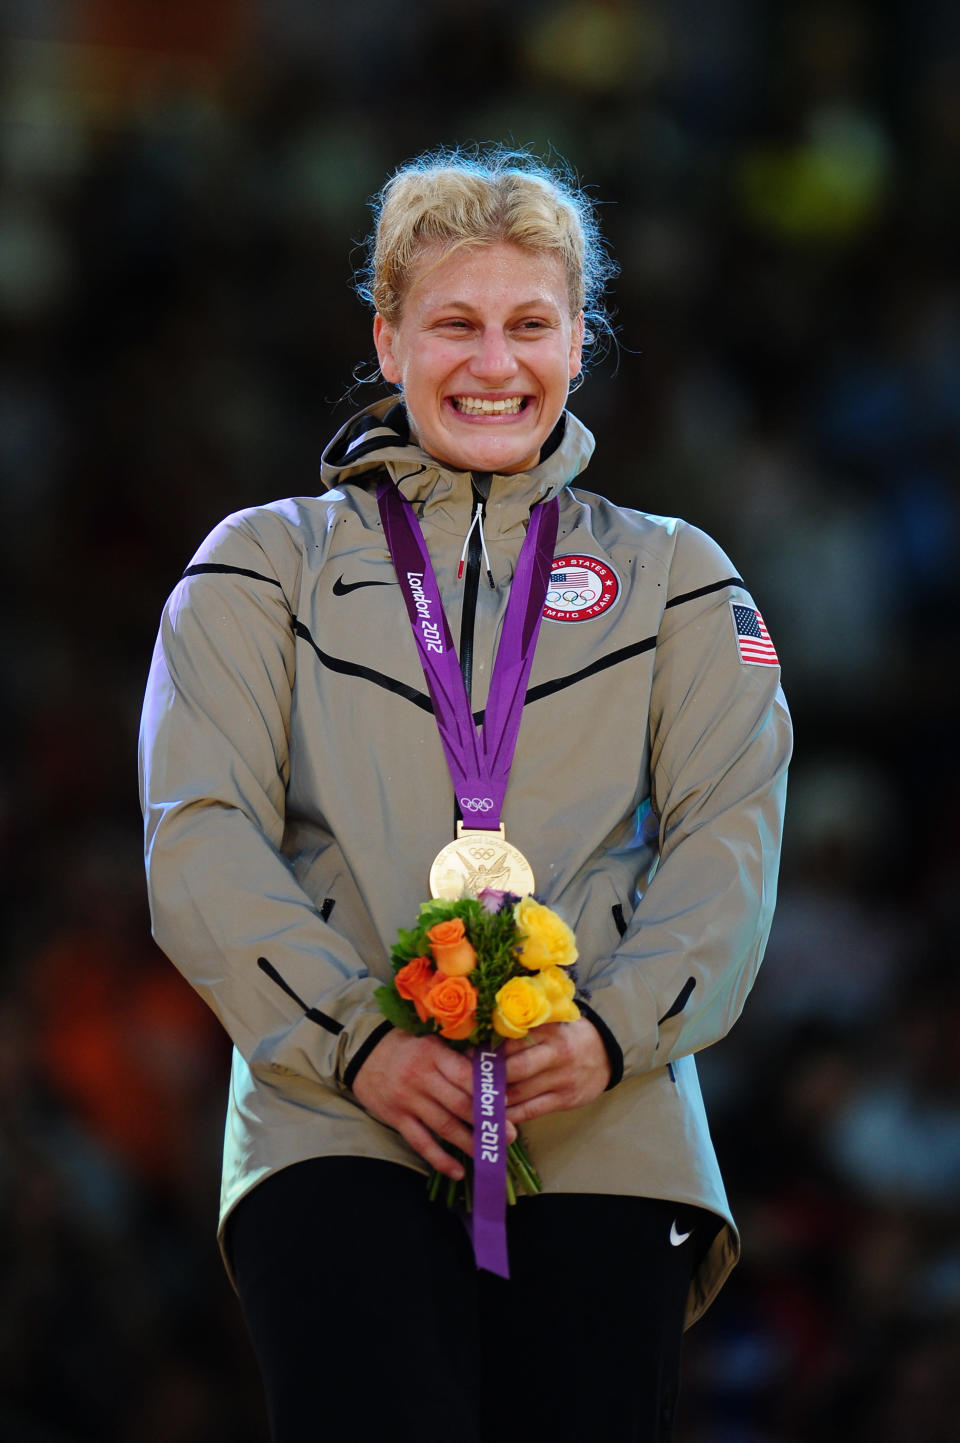 Gold medalist Kayla Harrison of the United States in the Women's -78 kg Judo on Day 6 of the London 2012 Olympic Games at ExCeL on August 2, 2012 in London, England. (Photo by Laurence Griffiths/Getty Images)